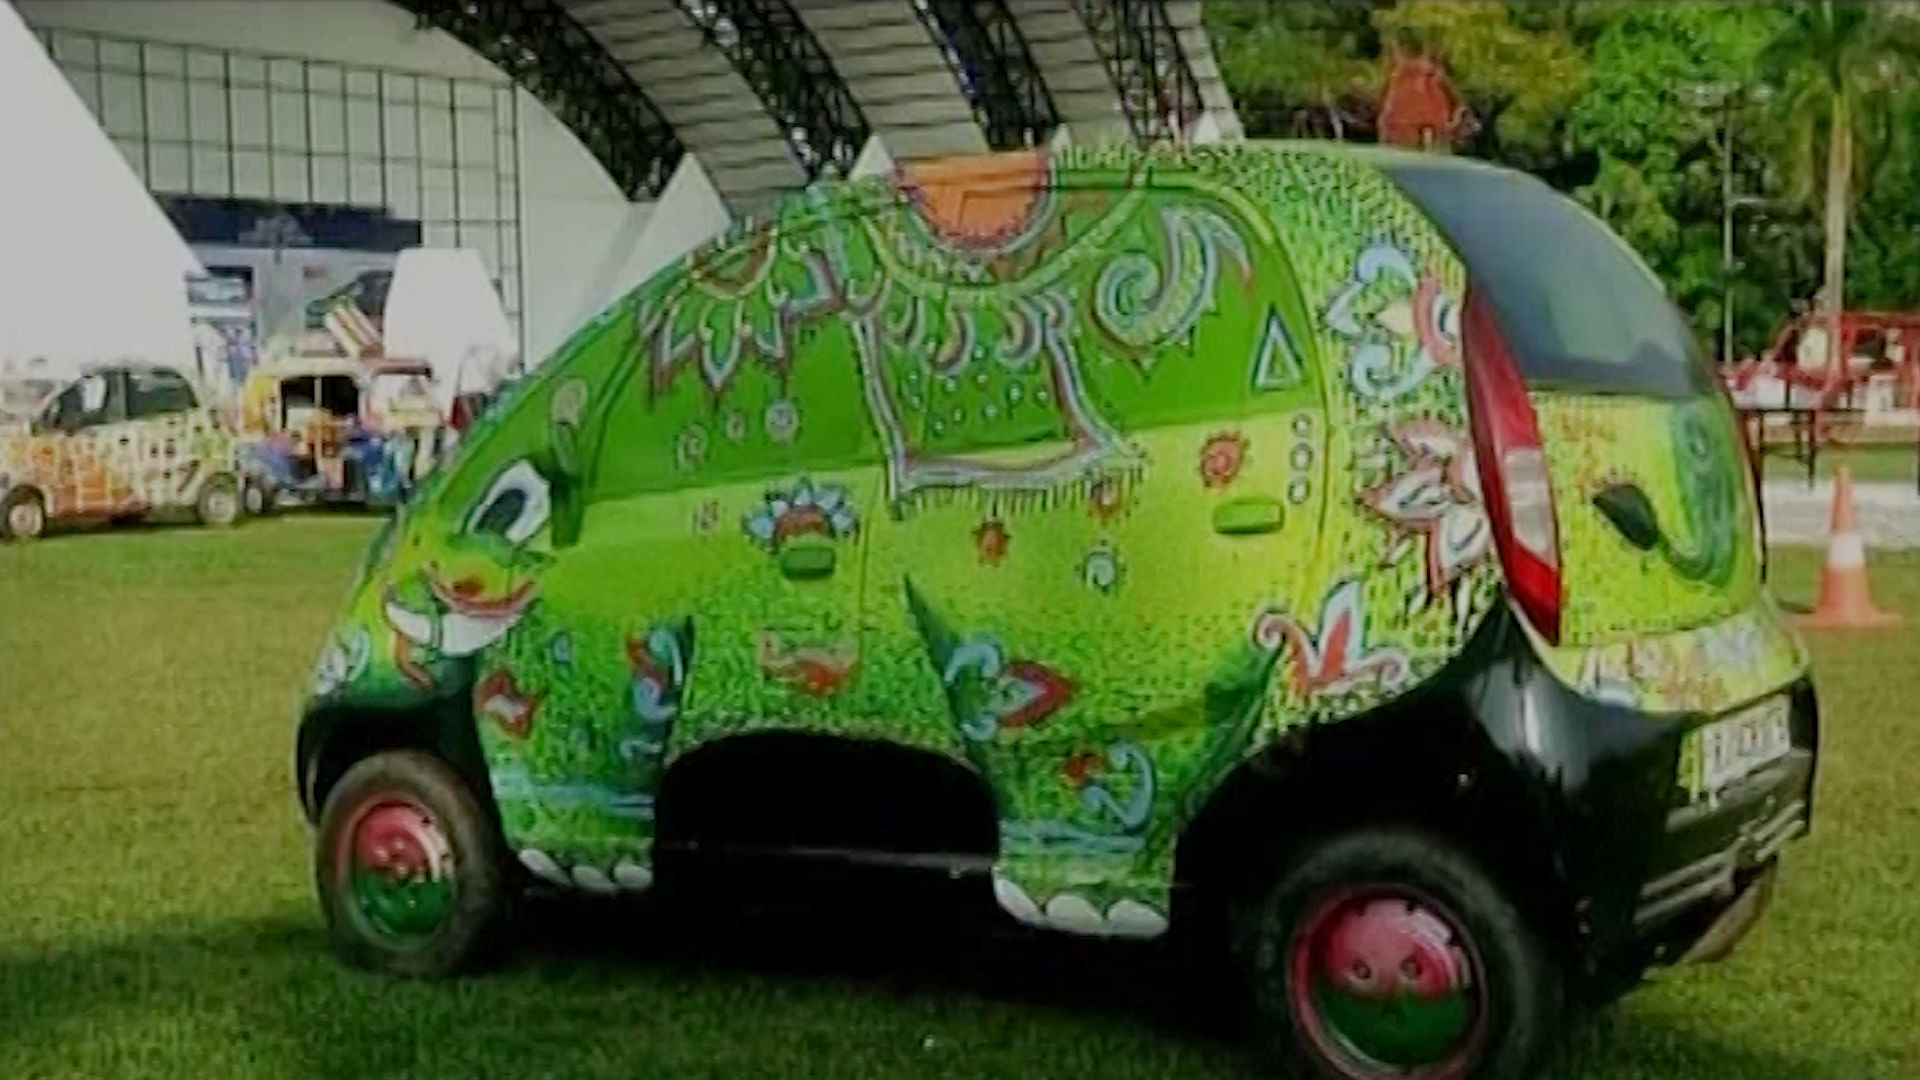 A car painted as part of the Cartist Yatra